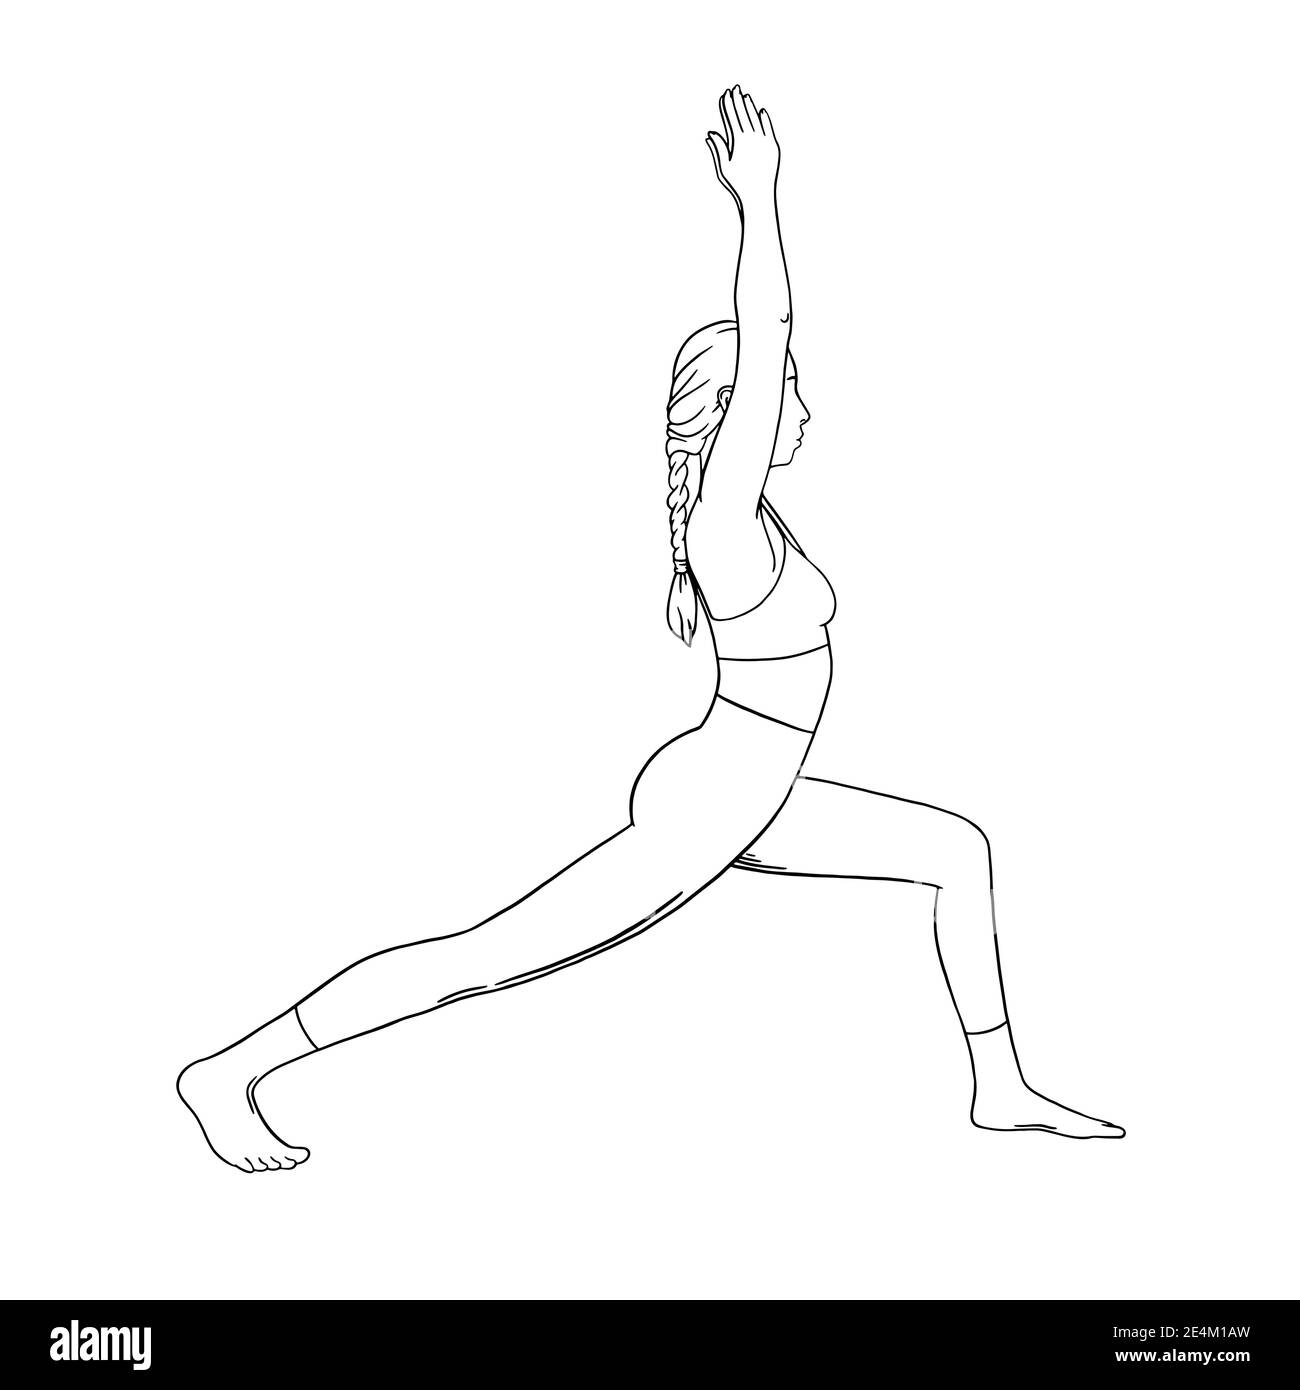 Yoga warrior pose or virabhadrasana II. Woman yoga workout for slim body. Hand drawn sketch vector illustration isolated on white background Stock Vector